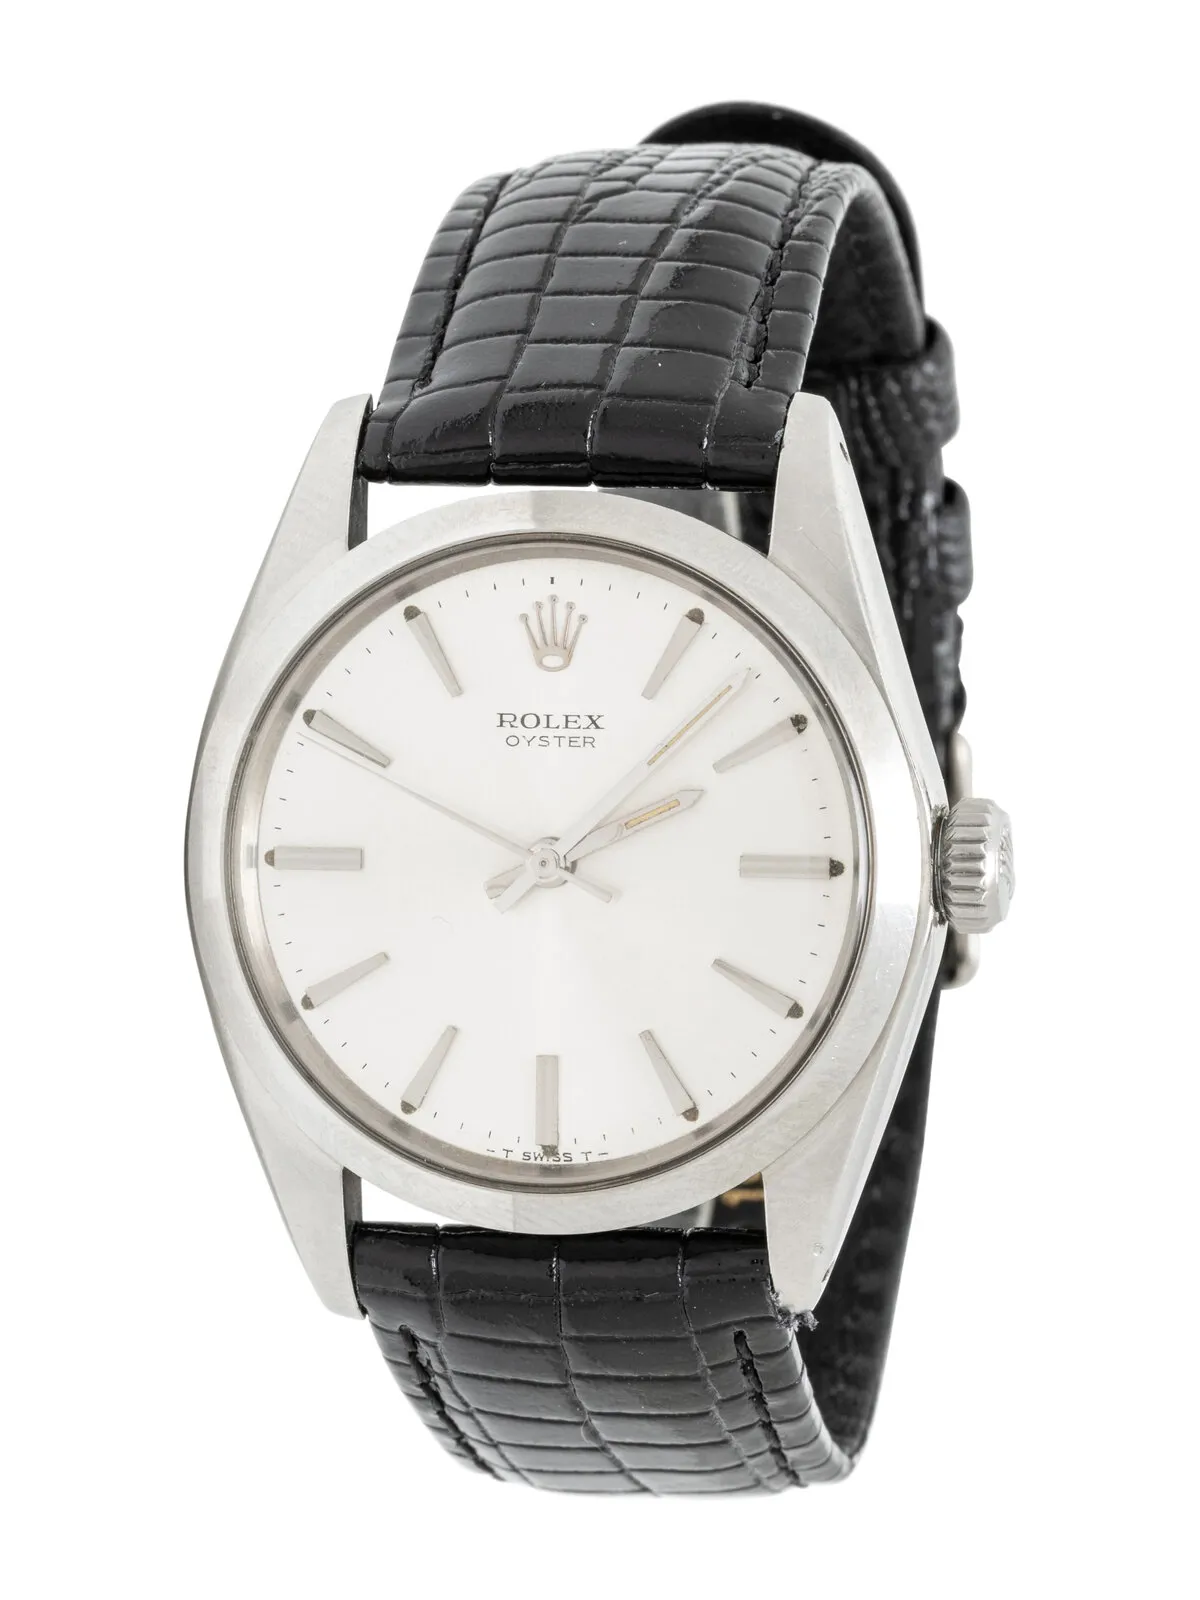 Rolex Oyster 6246